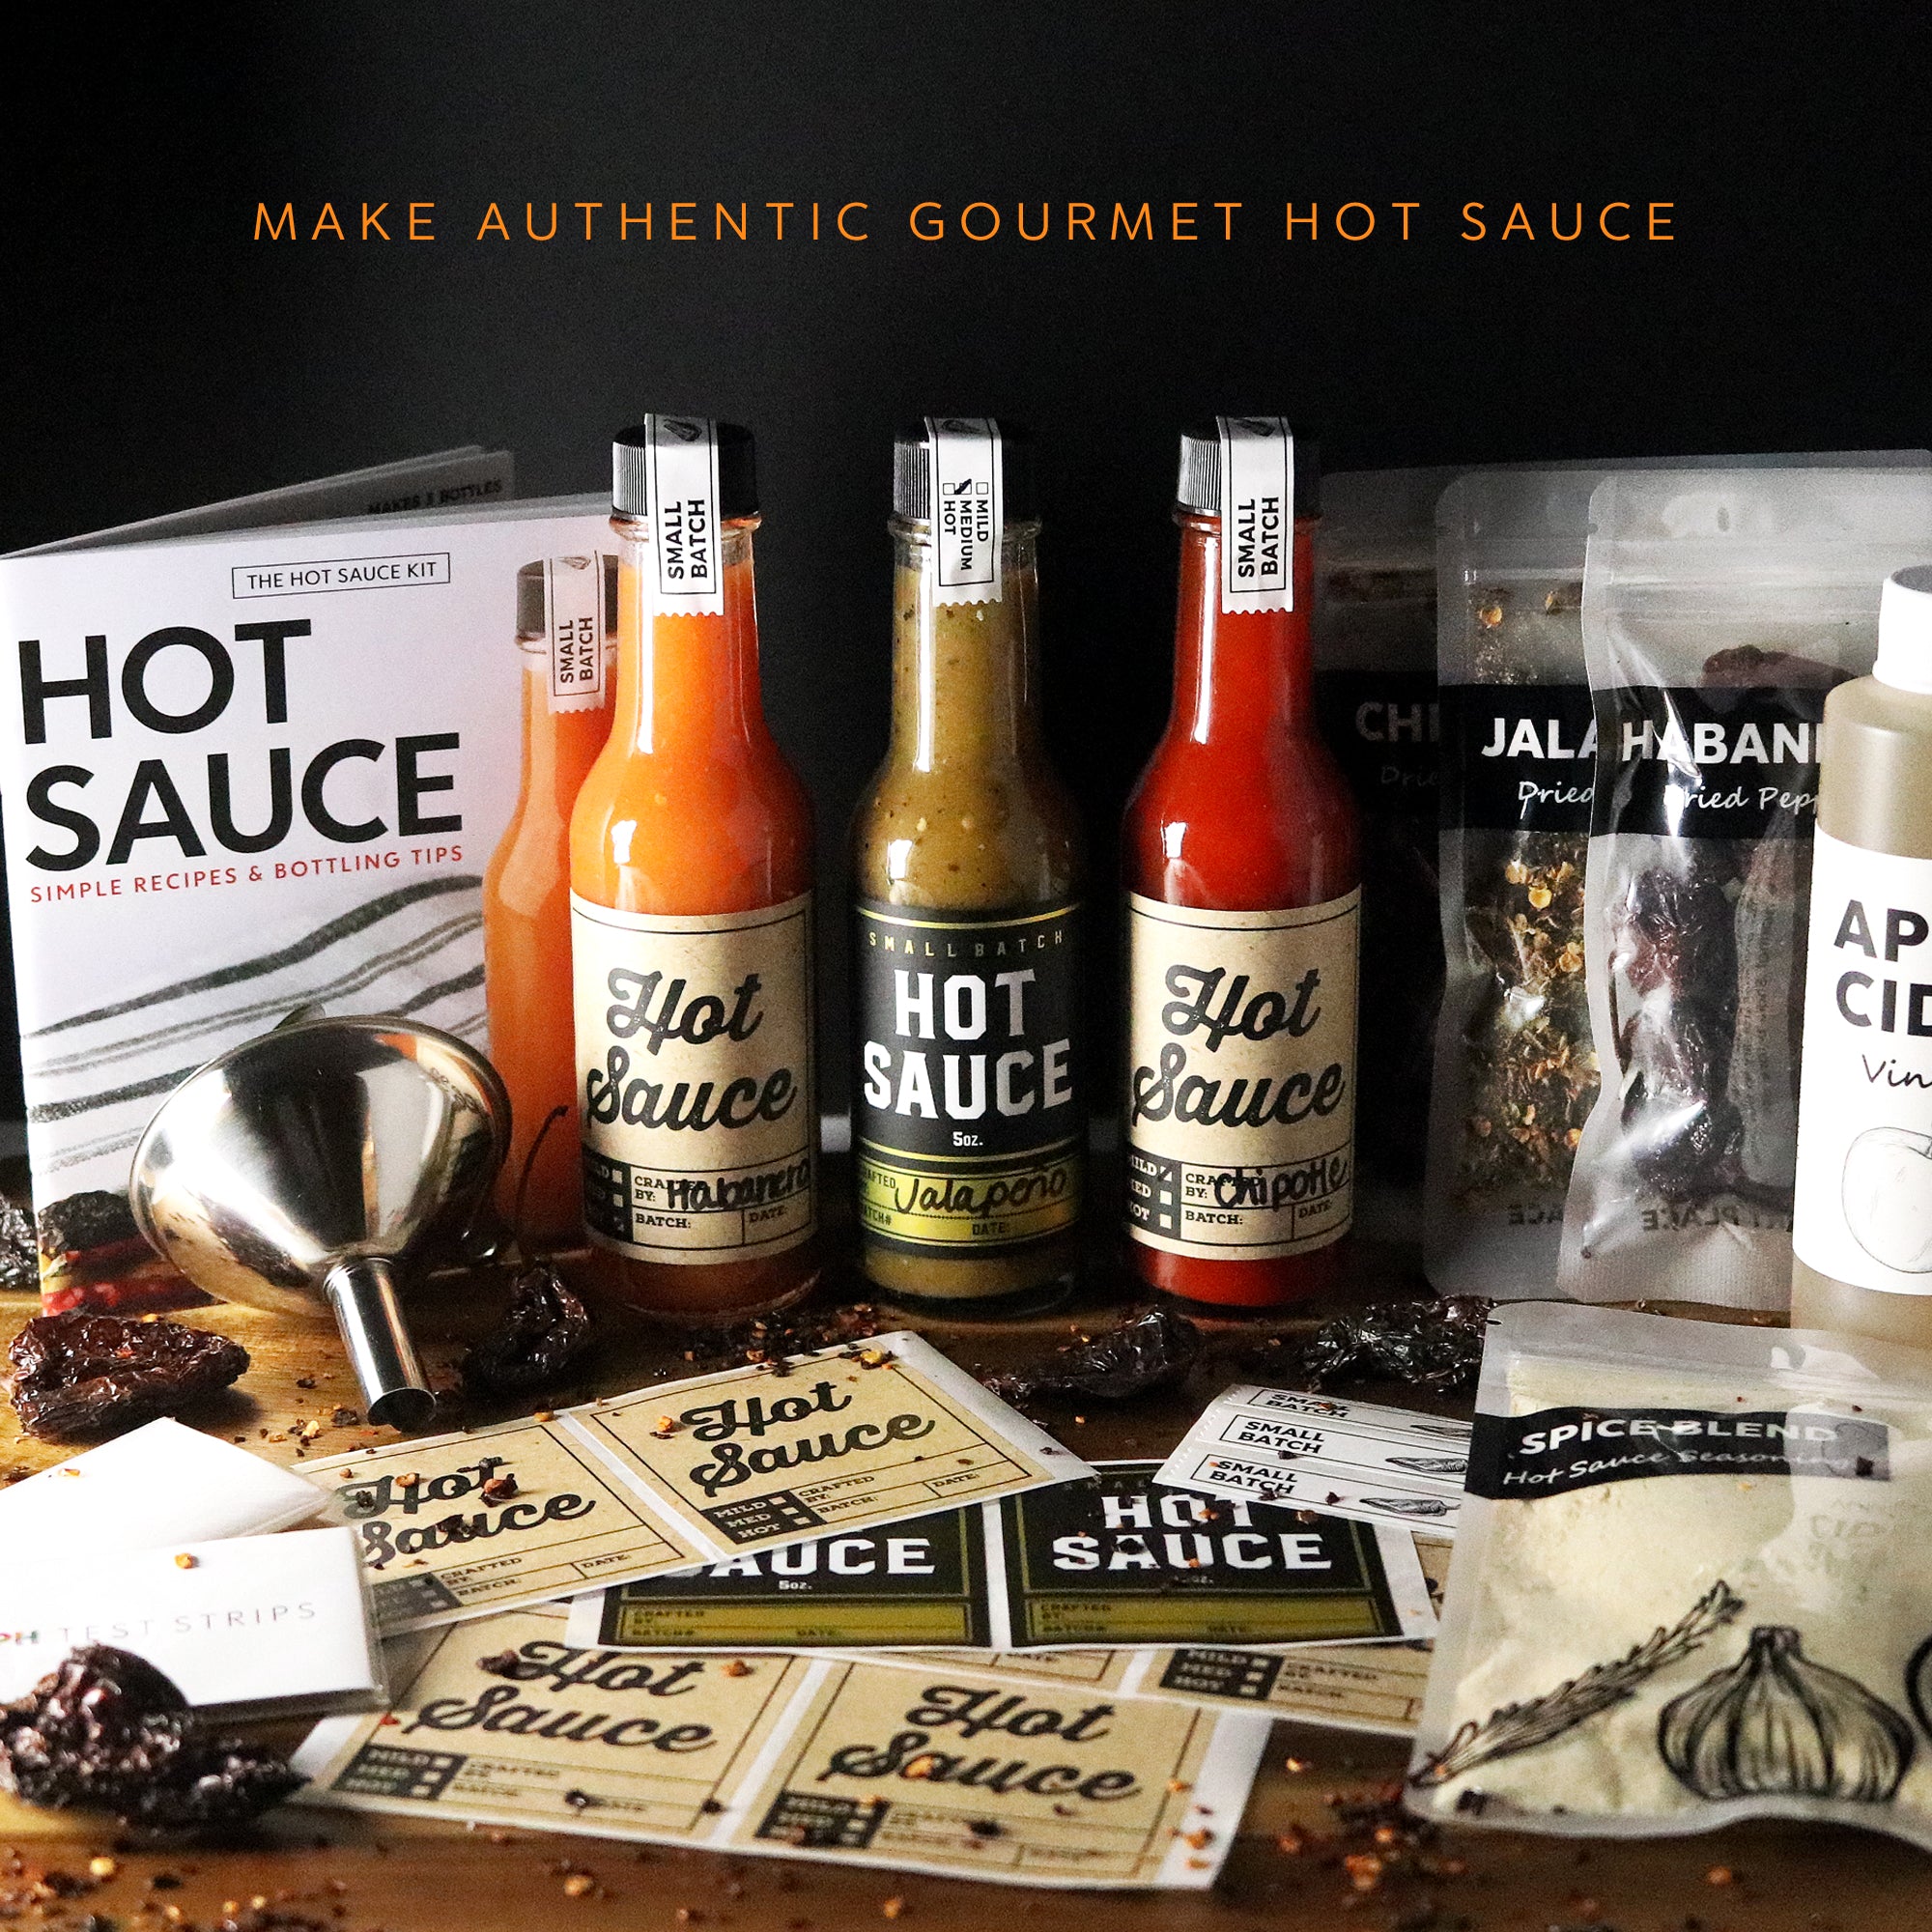 DIY Gift Kits Hot Sauce Making Kit Deluxe Edition, Gourmet Spicy Gift Set  for Men, Featuring 5th Generation Heirloom Peppers & Spice Blends, Natural  